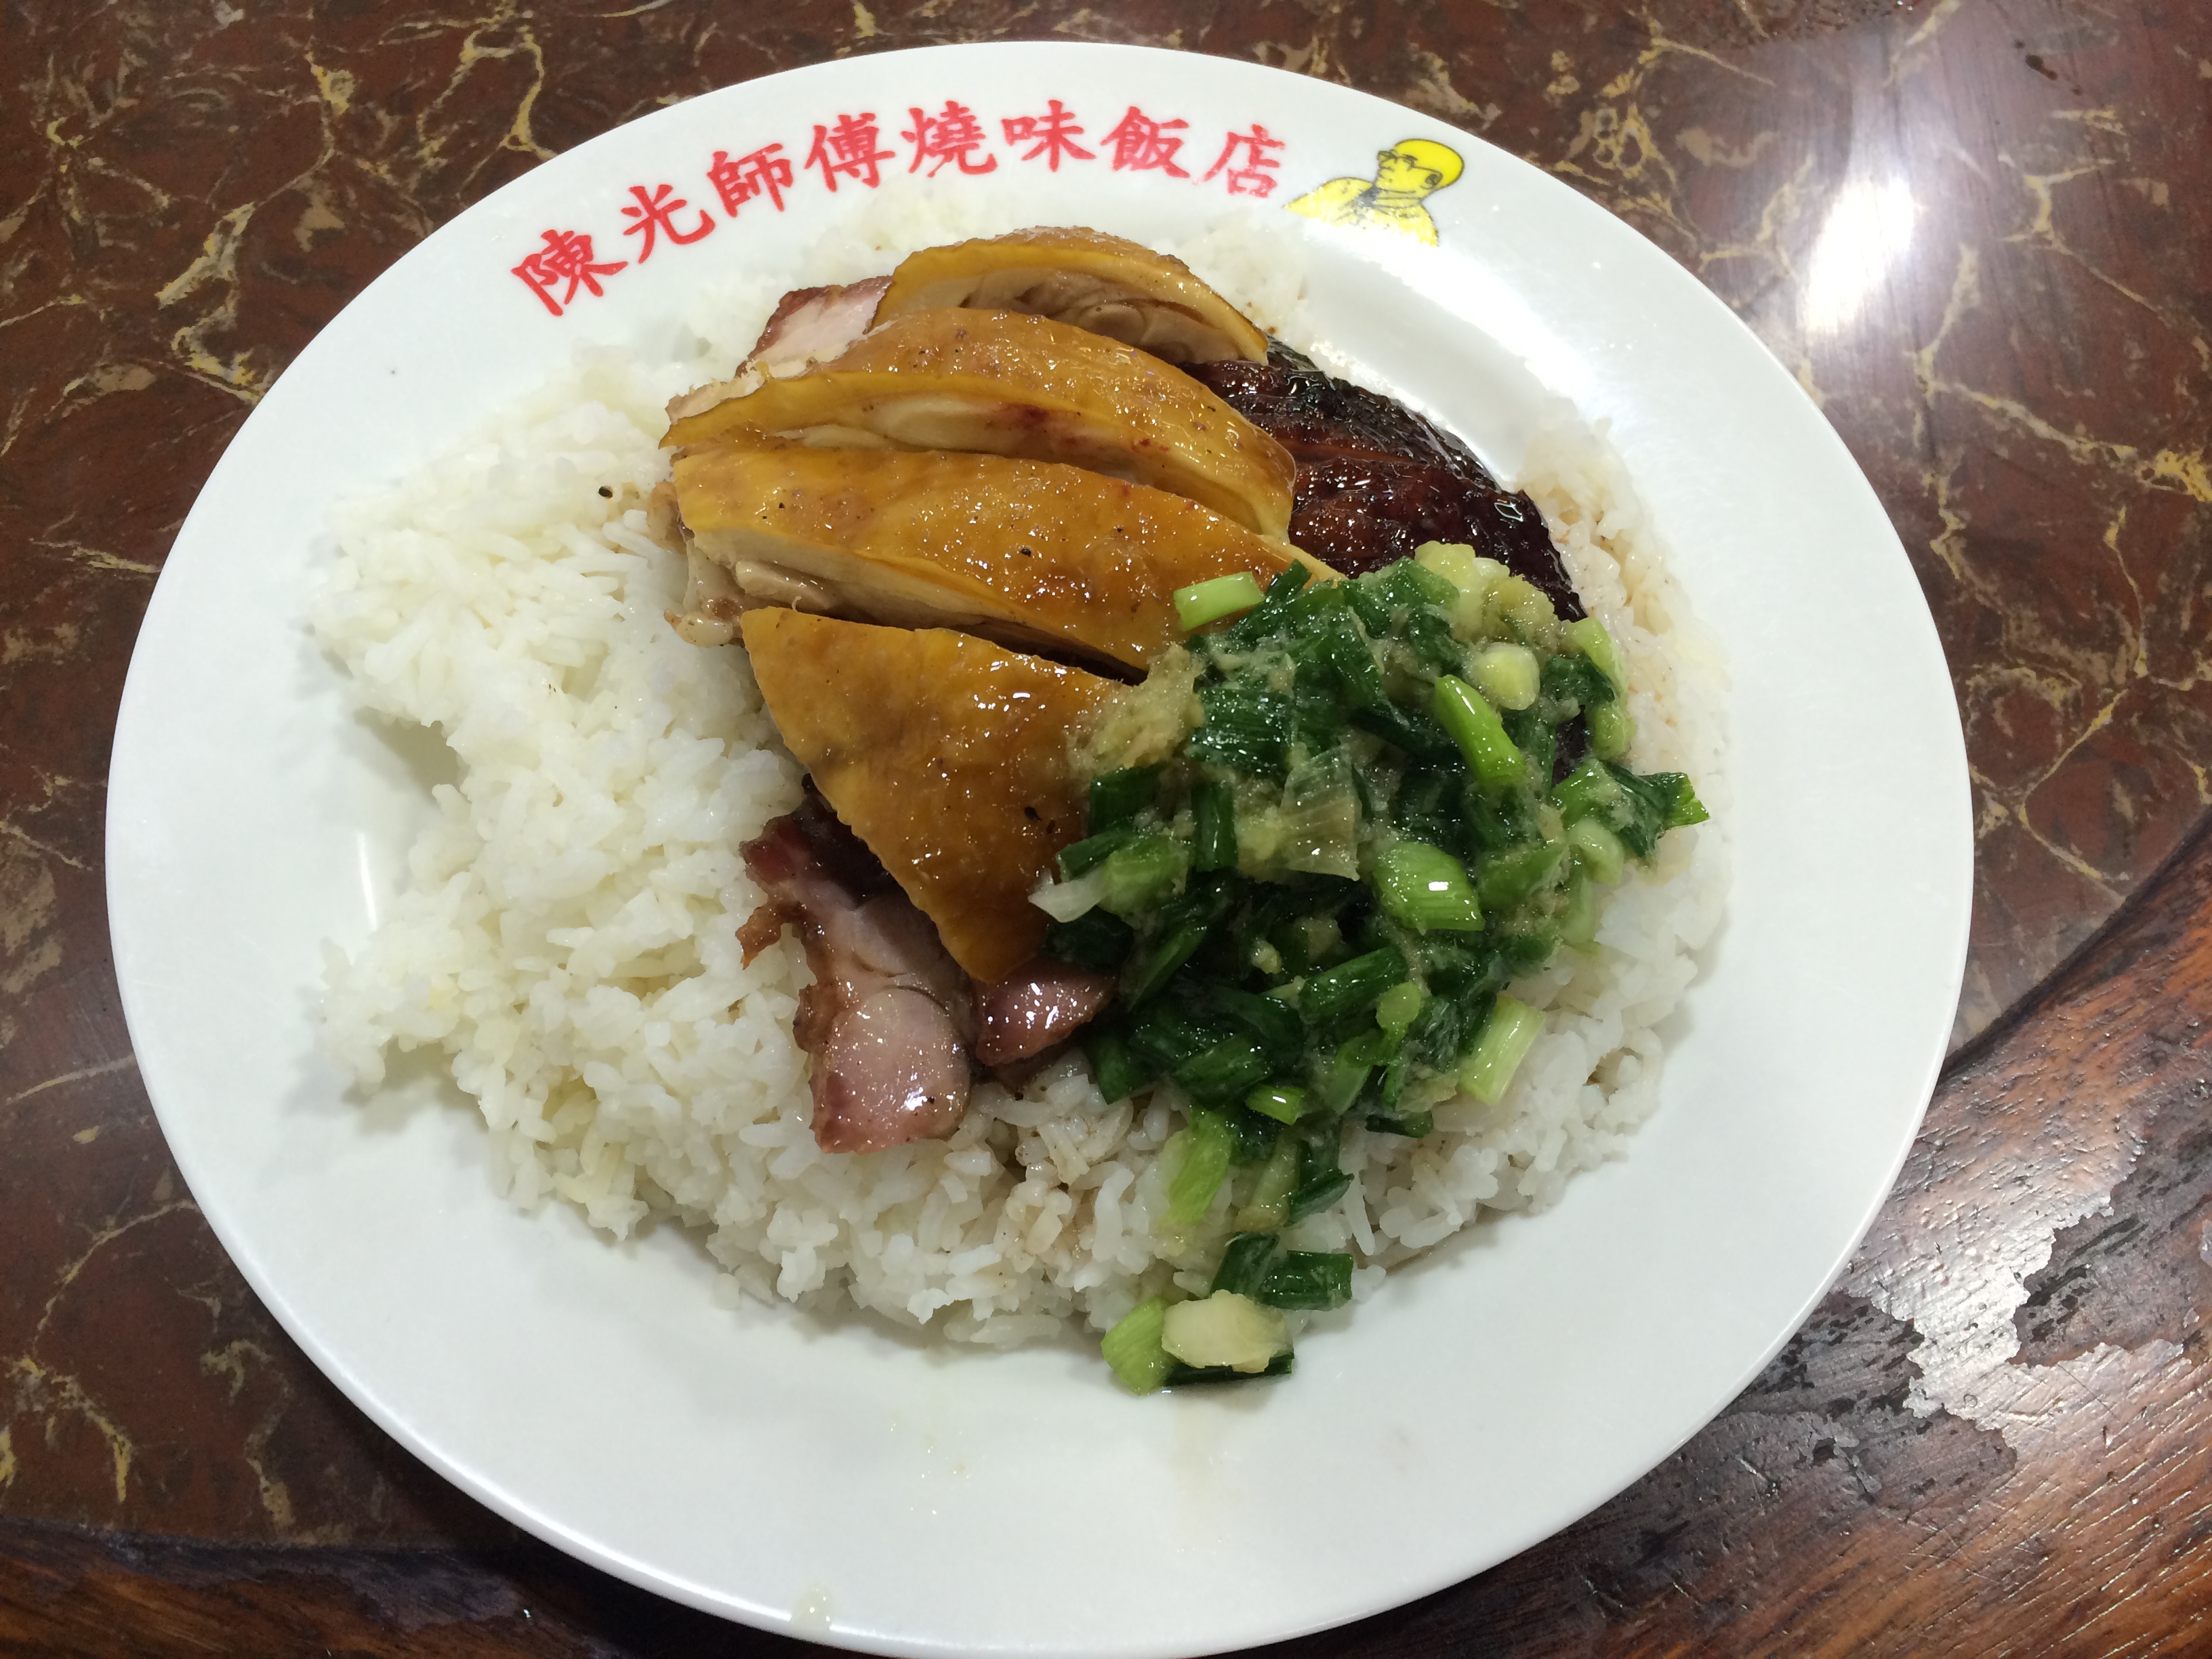 Barbequed Pork with Rice